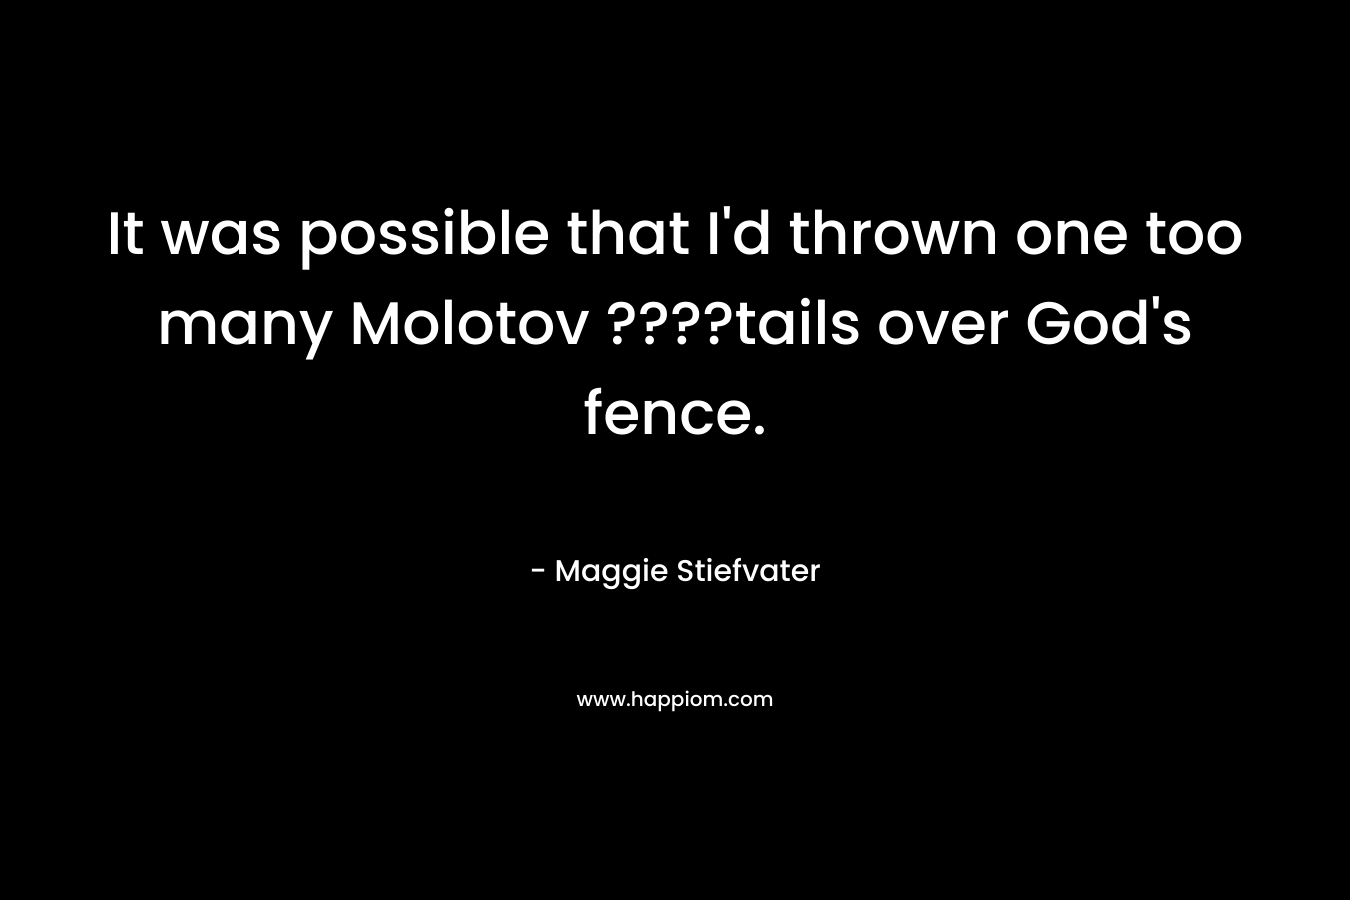 It was possible that I’d thrown one too many Molotov ????tails over God’s fence. – Maggie Stiefvater